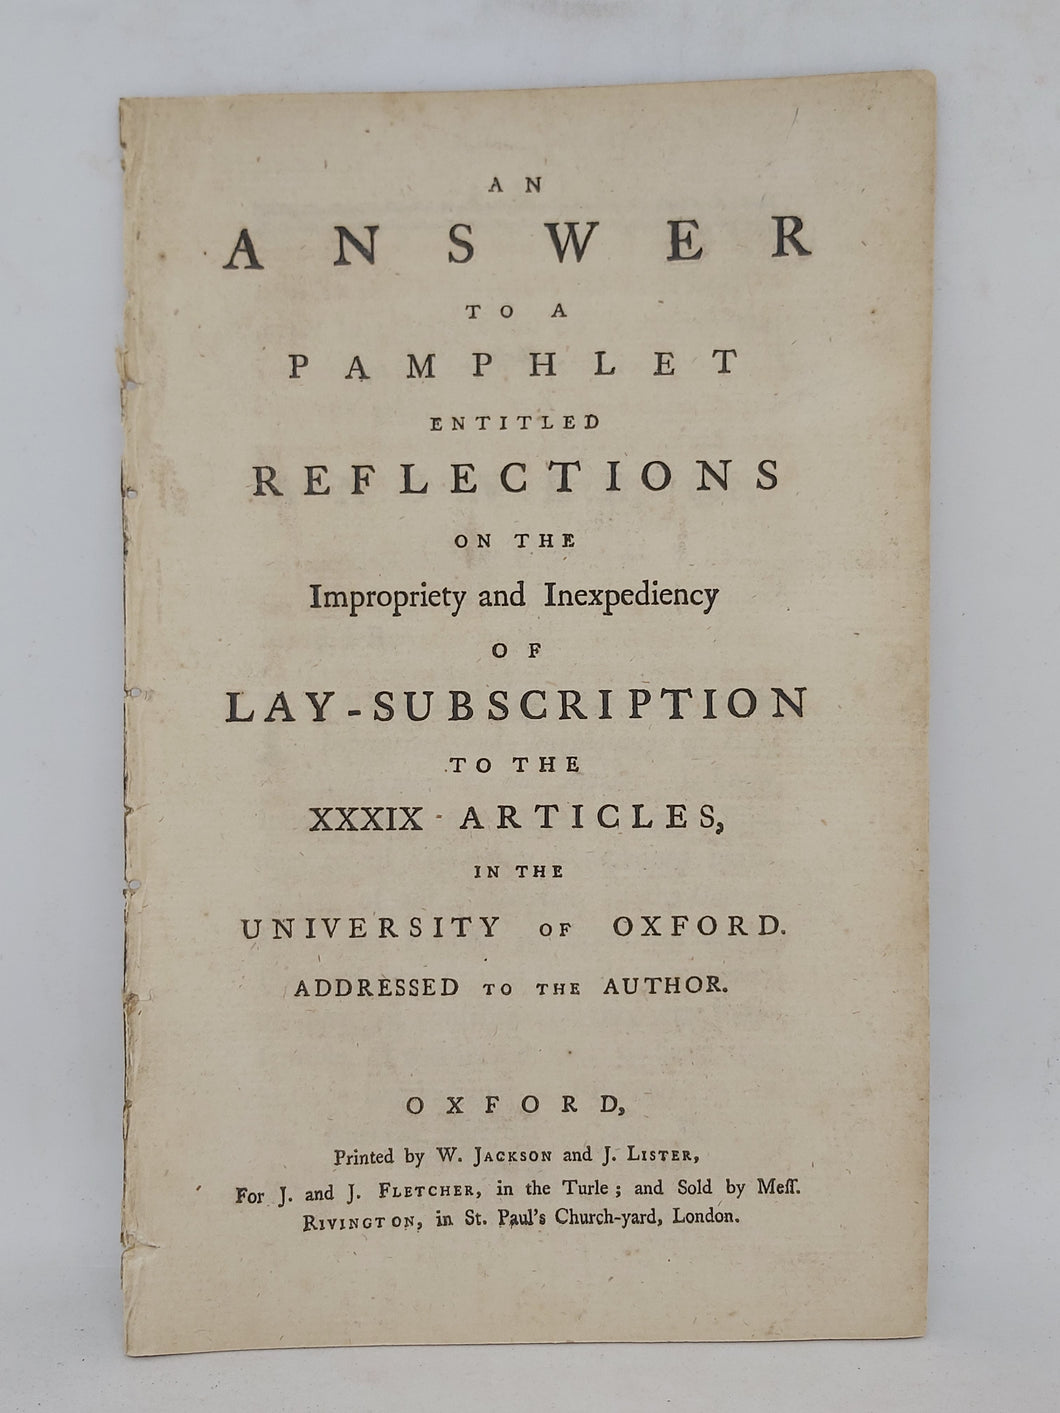 An answer to a pamphlet entitled reflections on the impropriety and inexpediency of Lay-Subscription to the XXXIX articles, 1772?